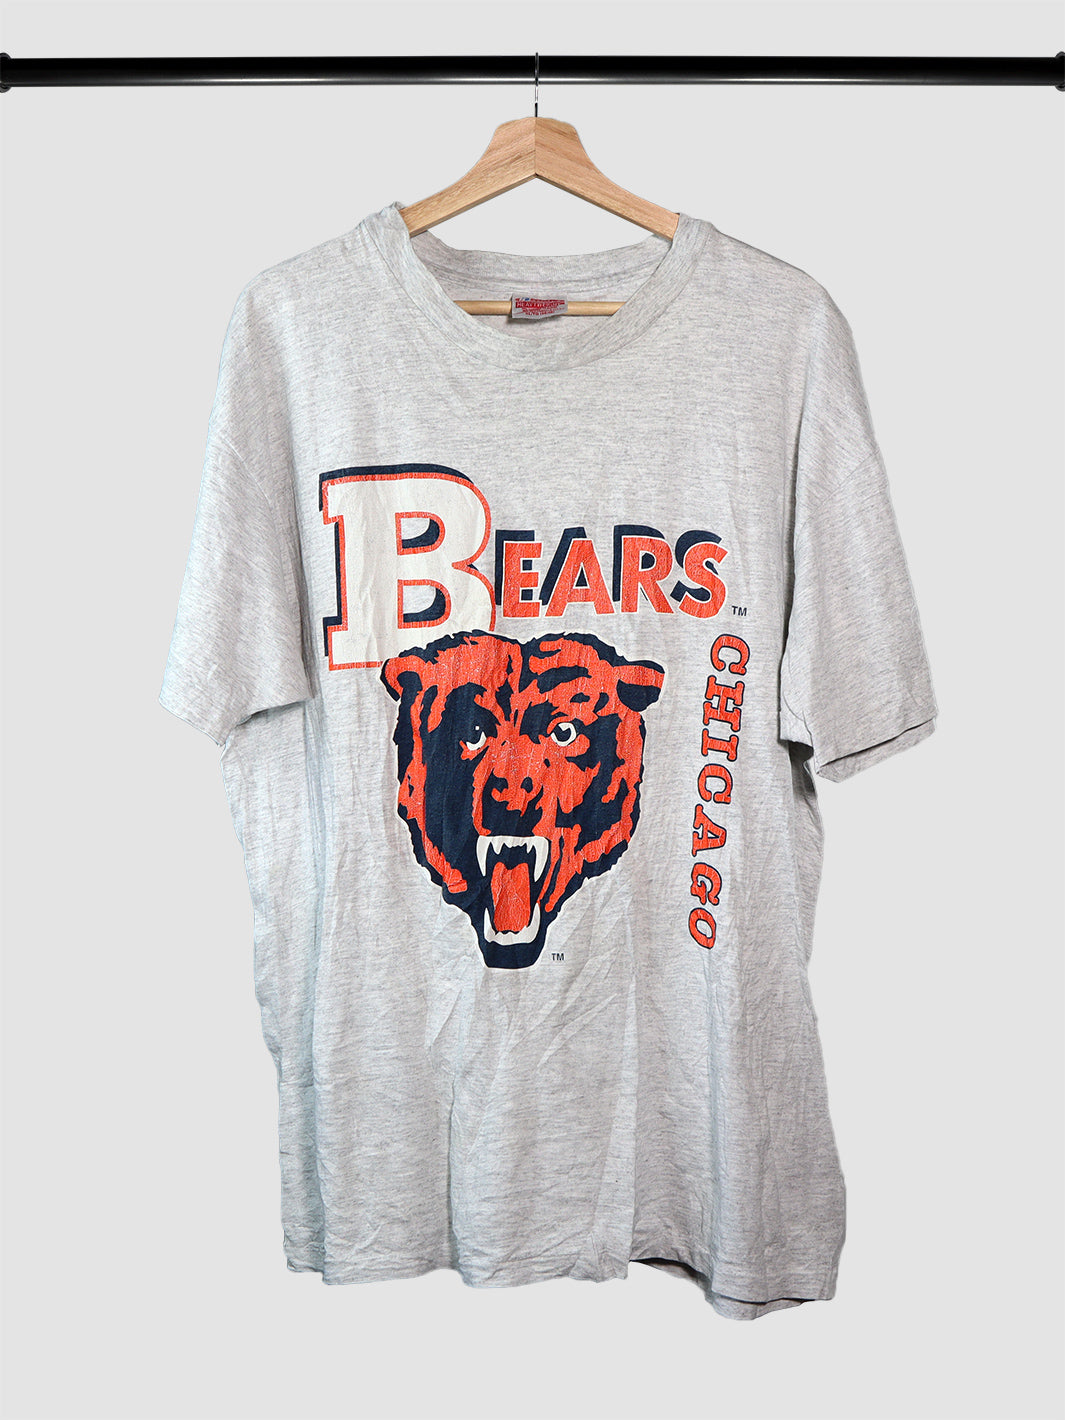 Chicago Bears Late 1990s T-Shirt  Size XL Heathered Grey Vintage Shirt –  Pretty Old